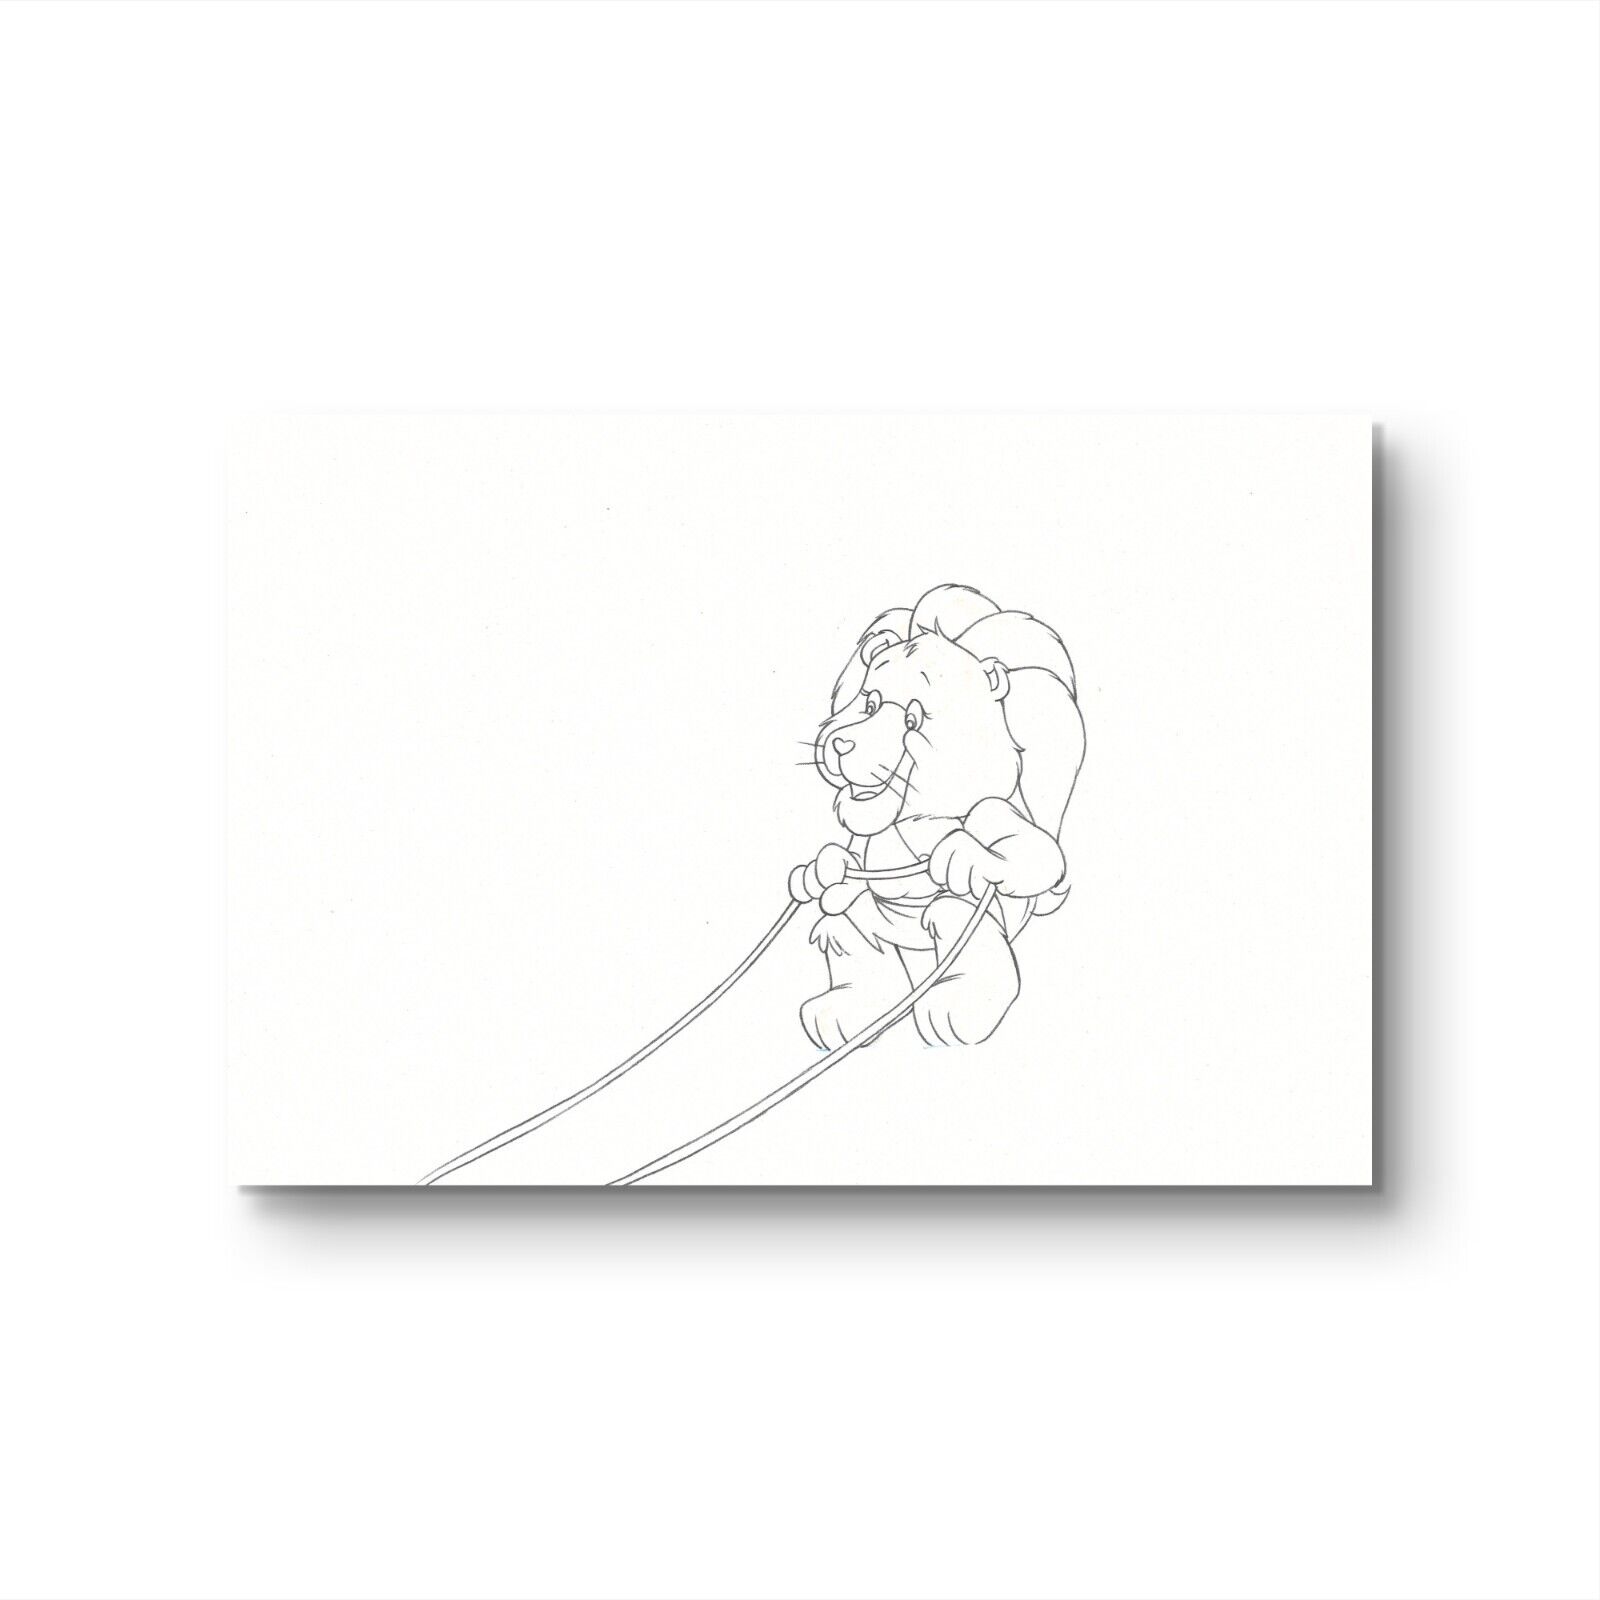 Care Bears Classic Series Animation Drawing, 1988: Brave Heart Lion, SSV1295